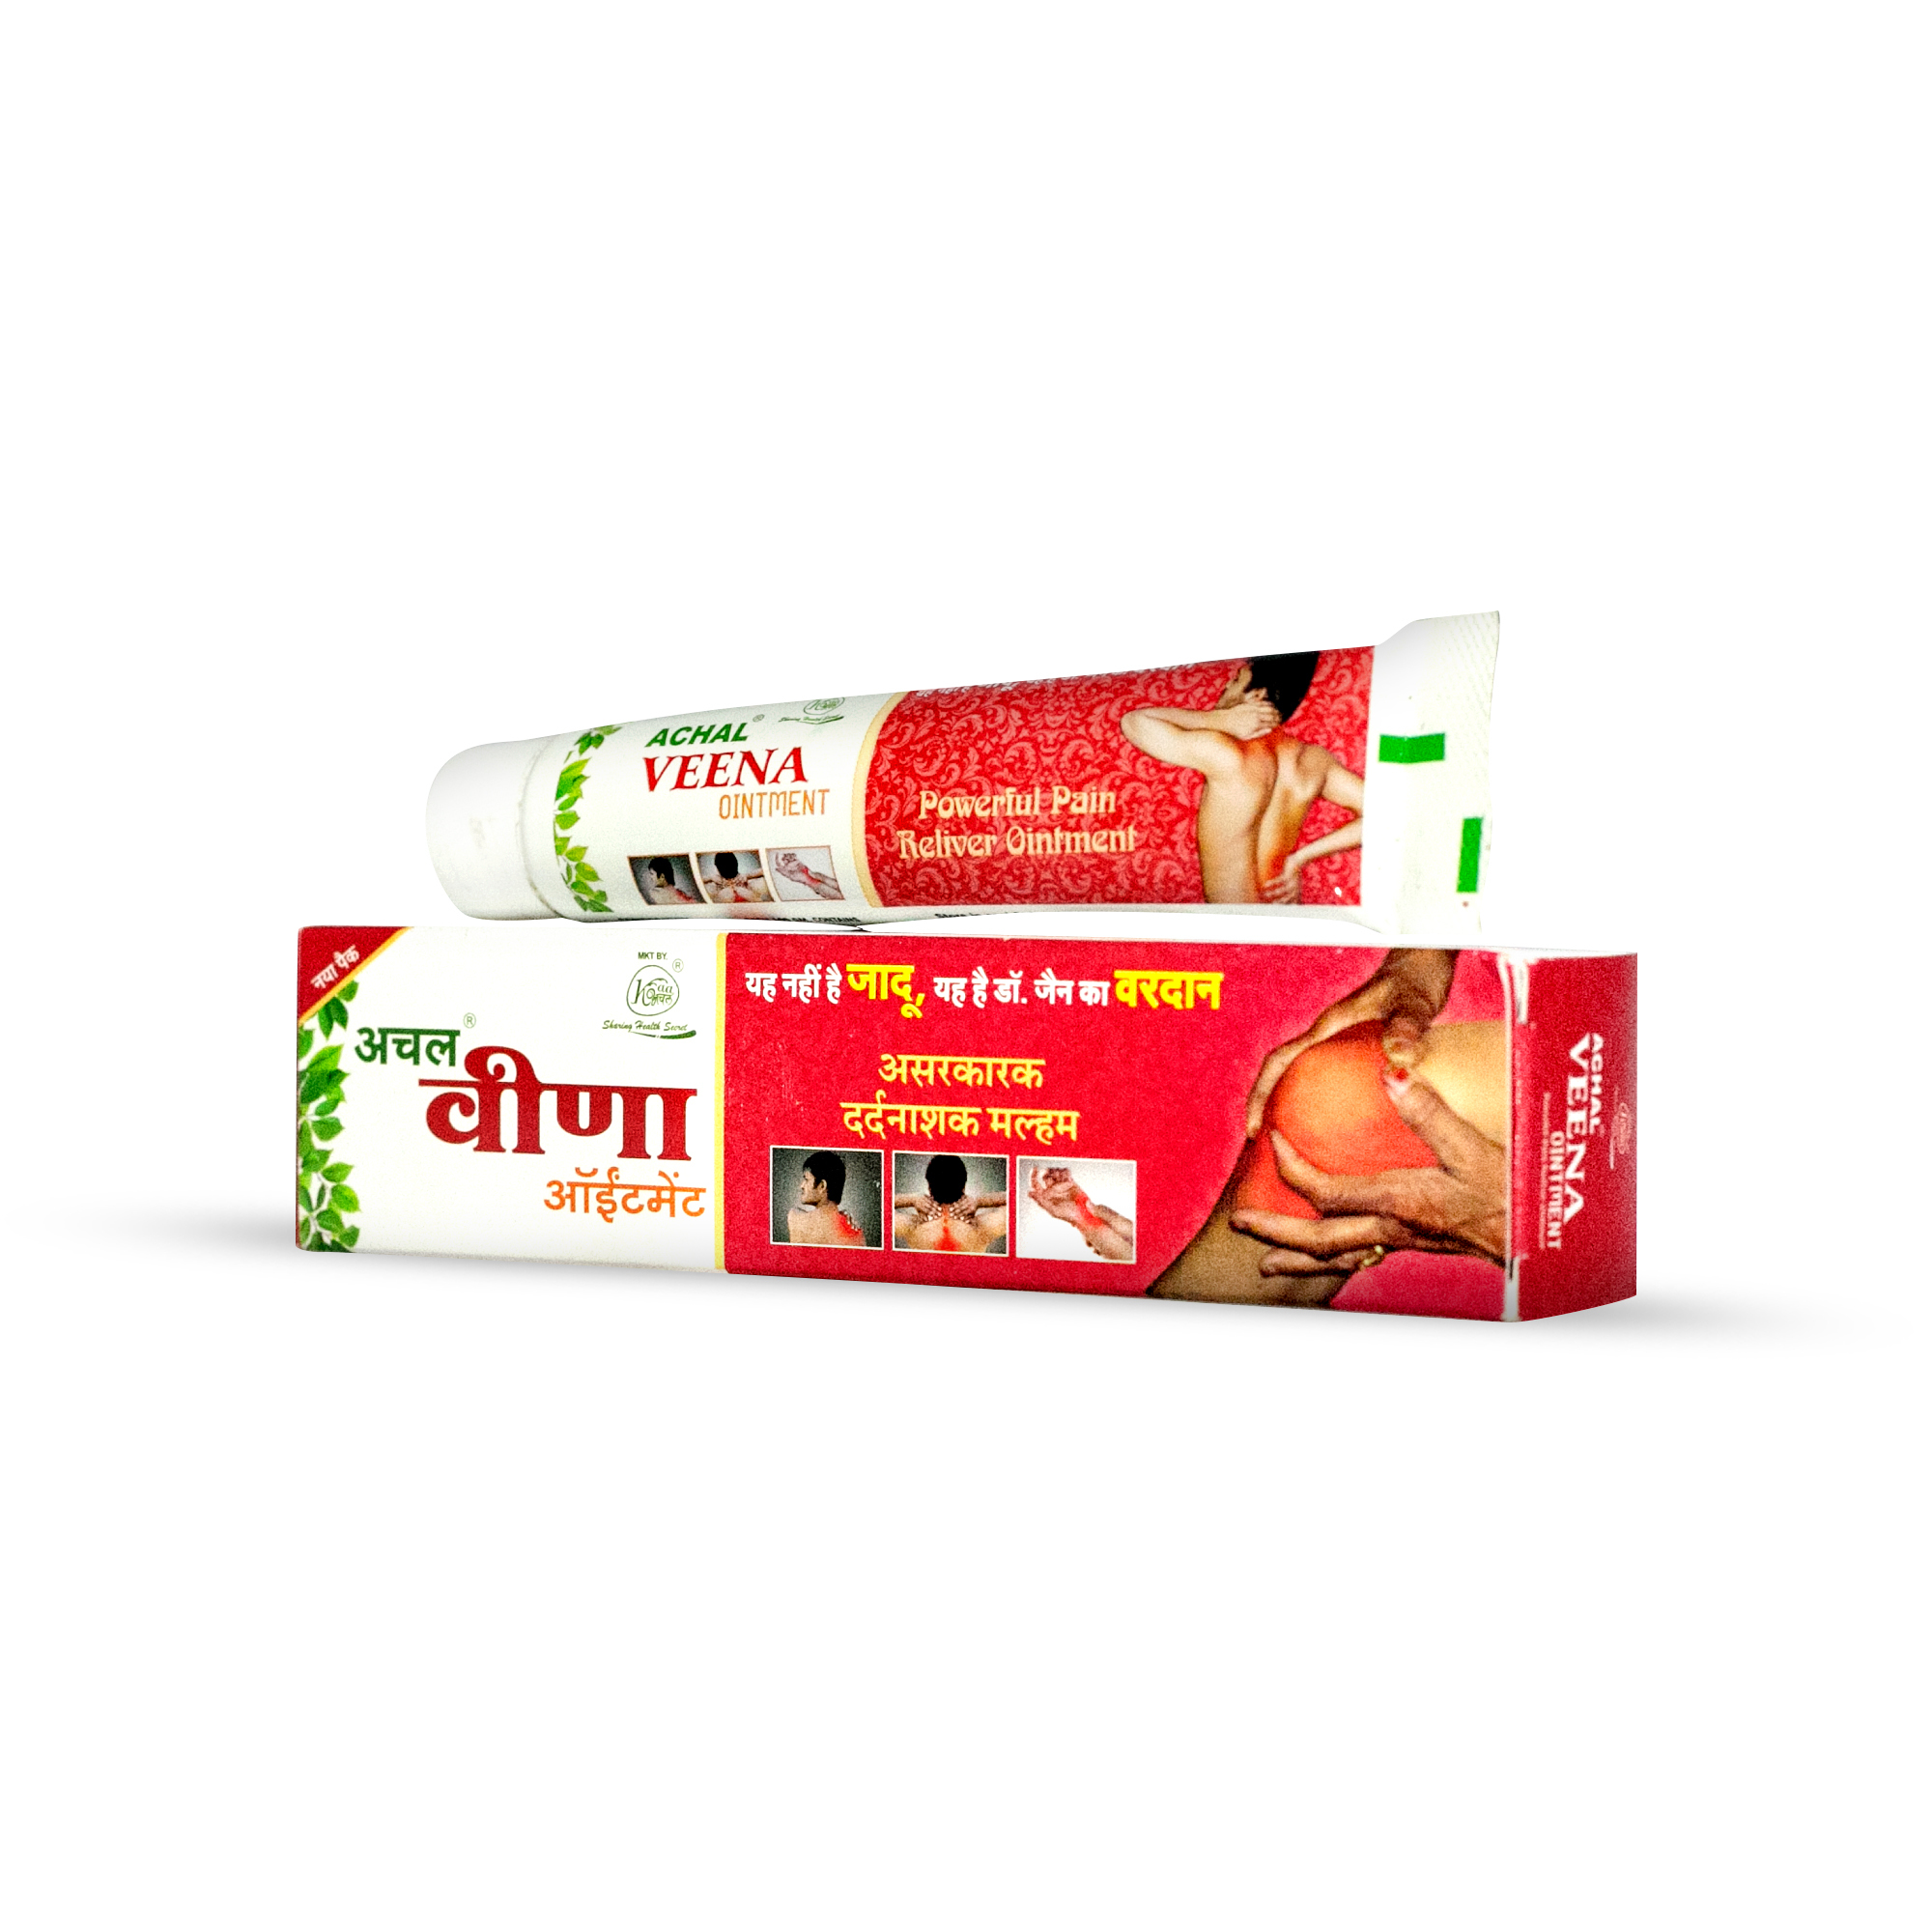 Achal Veena Pain Relief Ointment